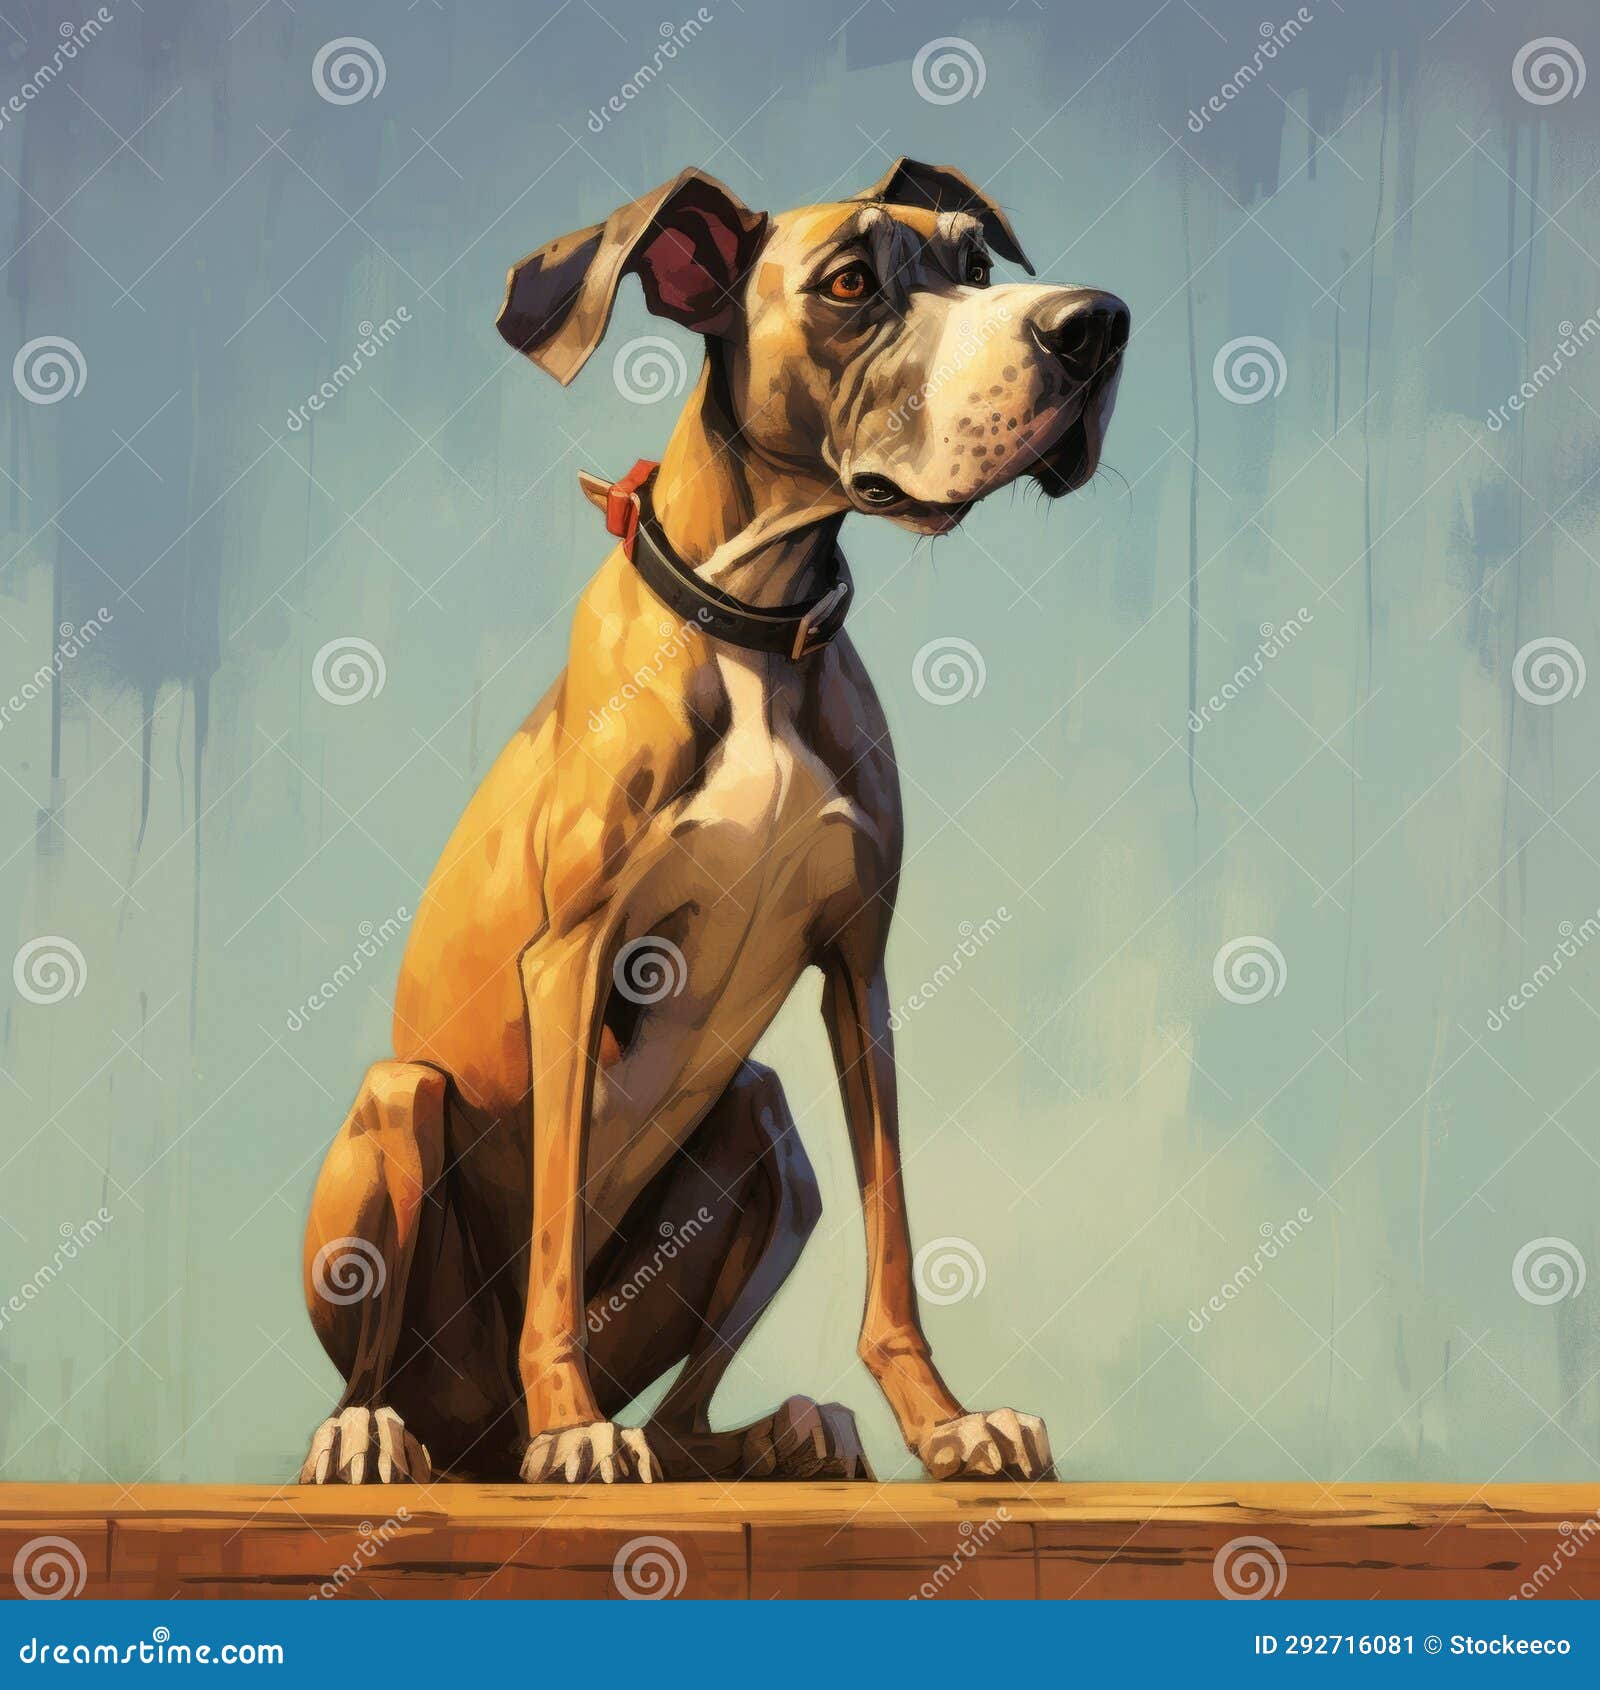 dog painting in james gilleard style: graphic novel realism with cartoonish character 